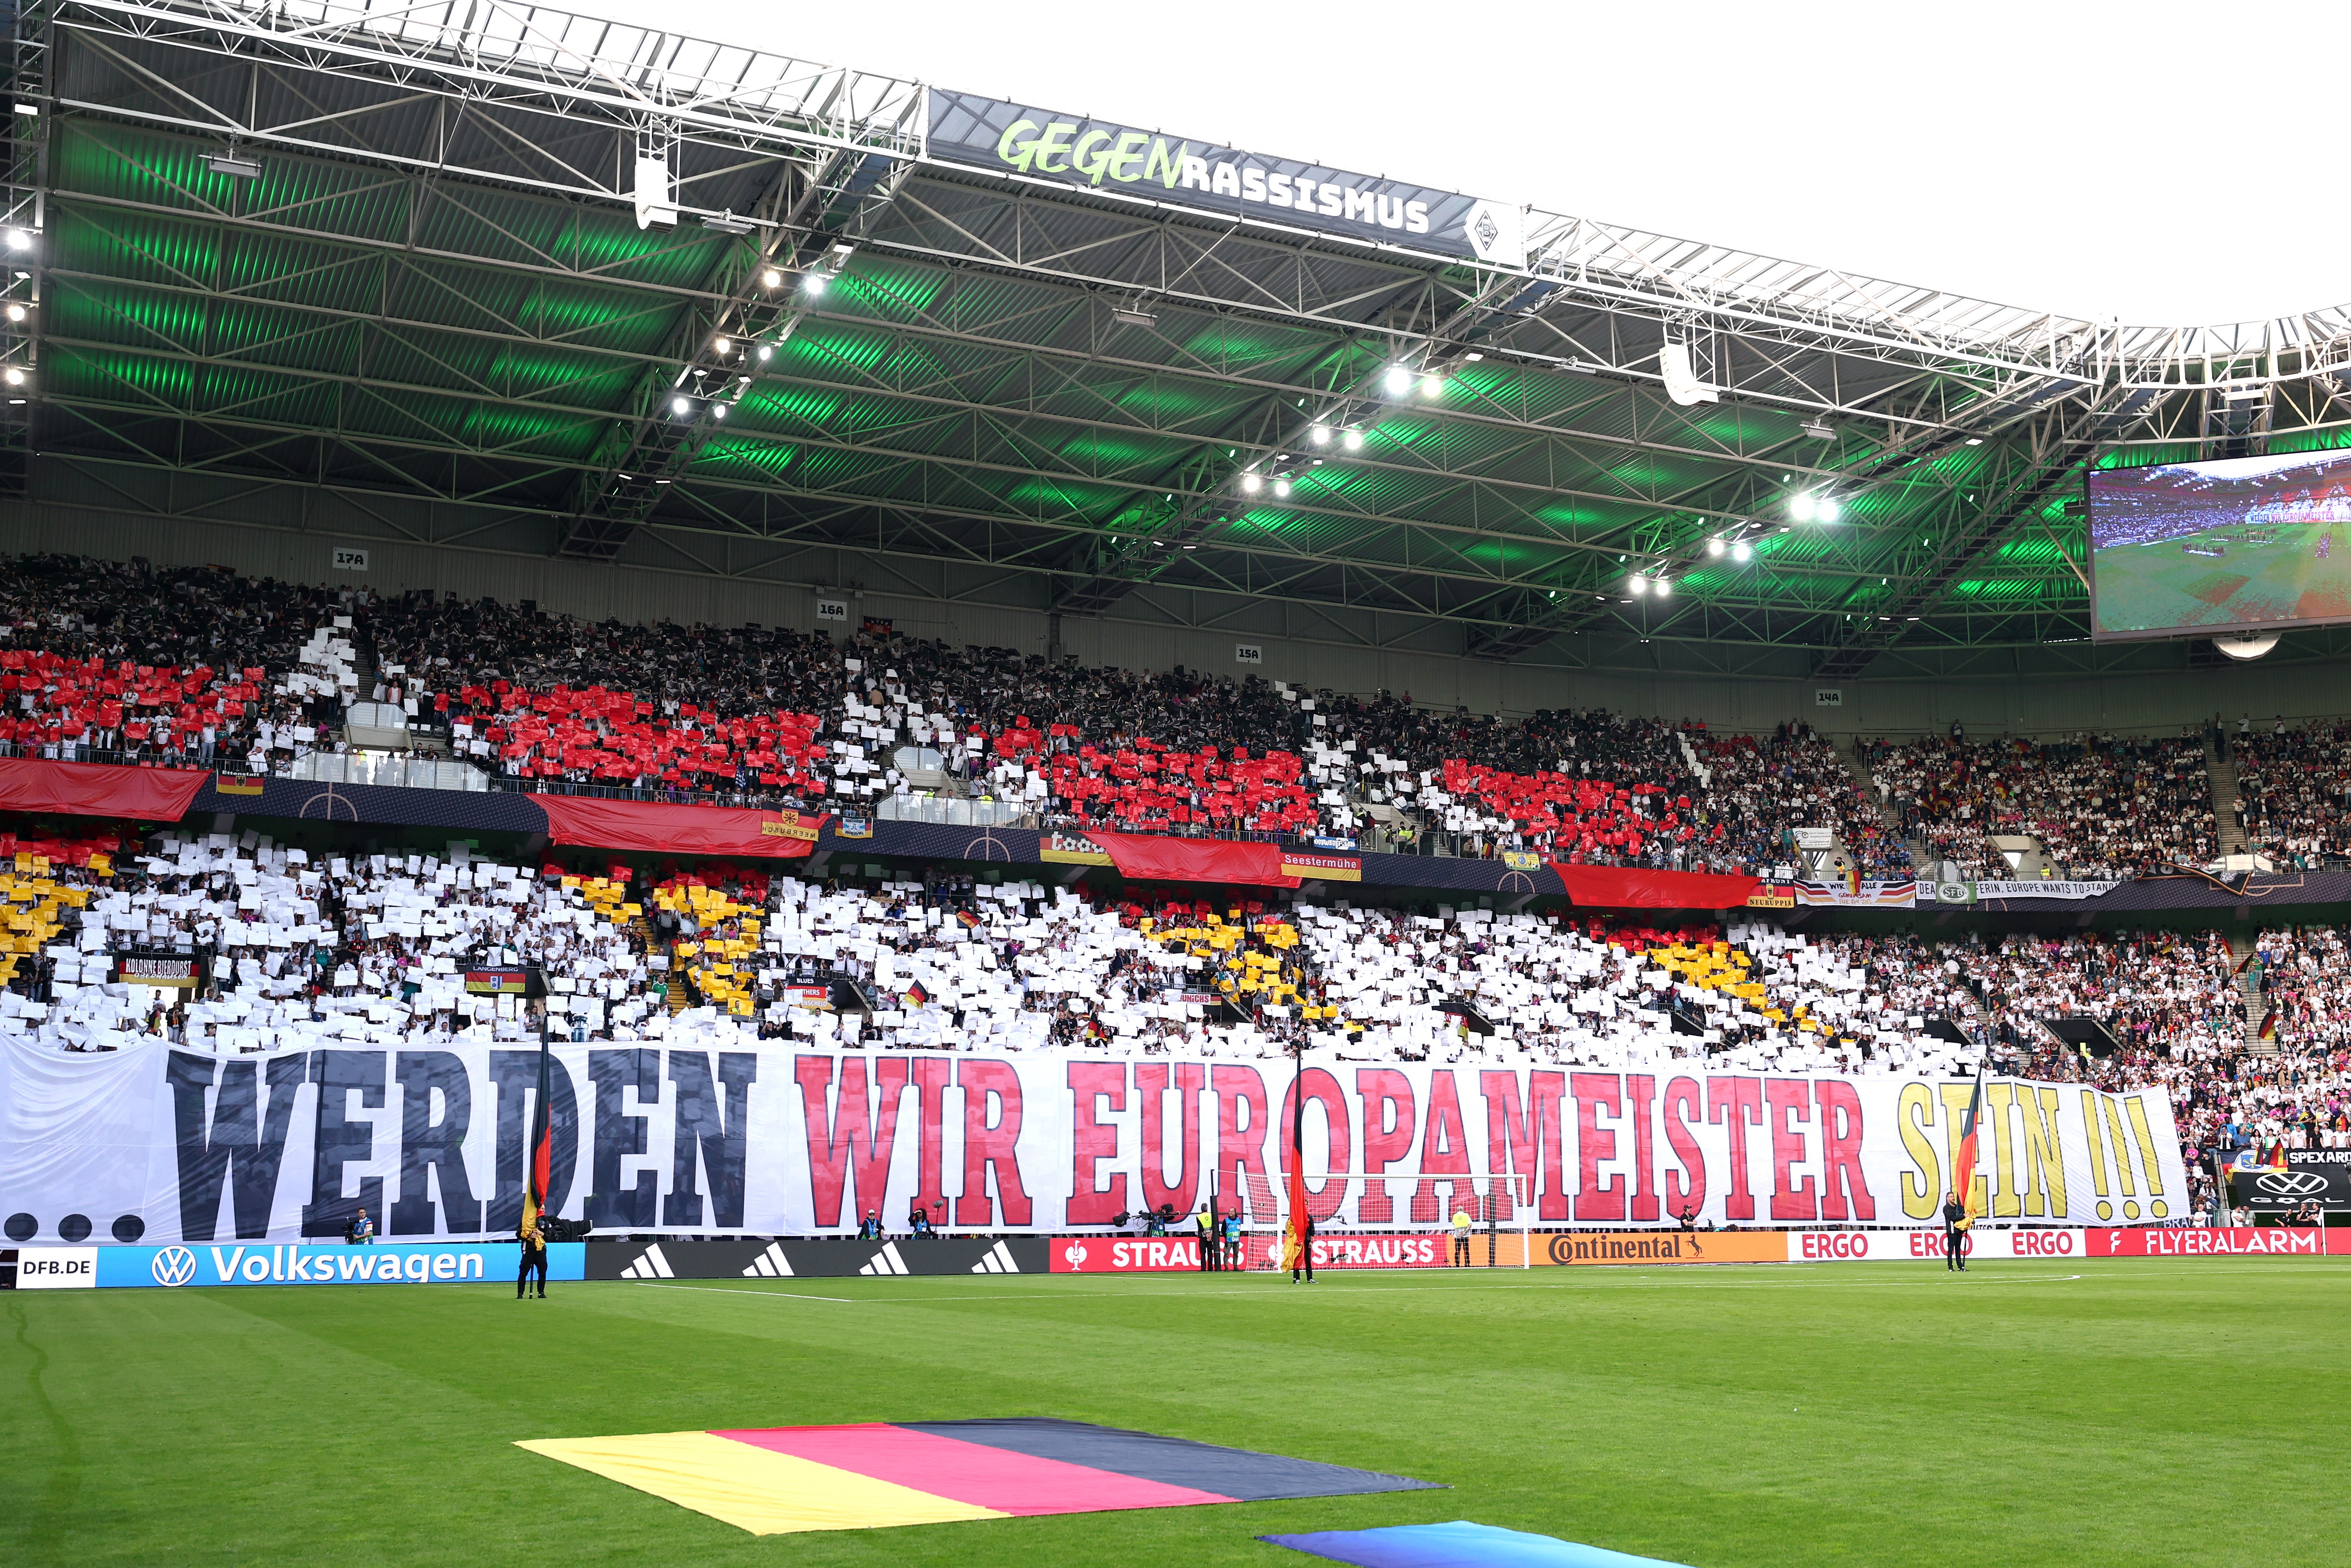 A banner expresses the hope of German fans, as the team bid to become European champions again